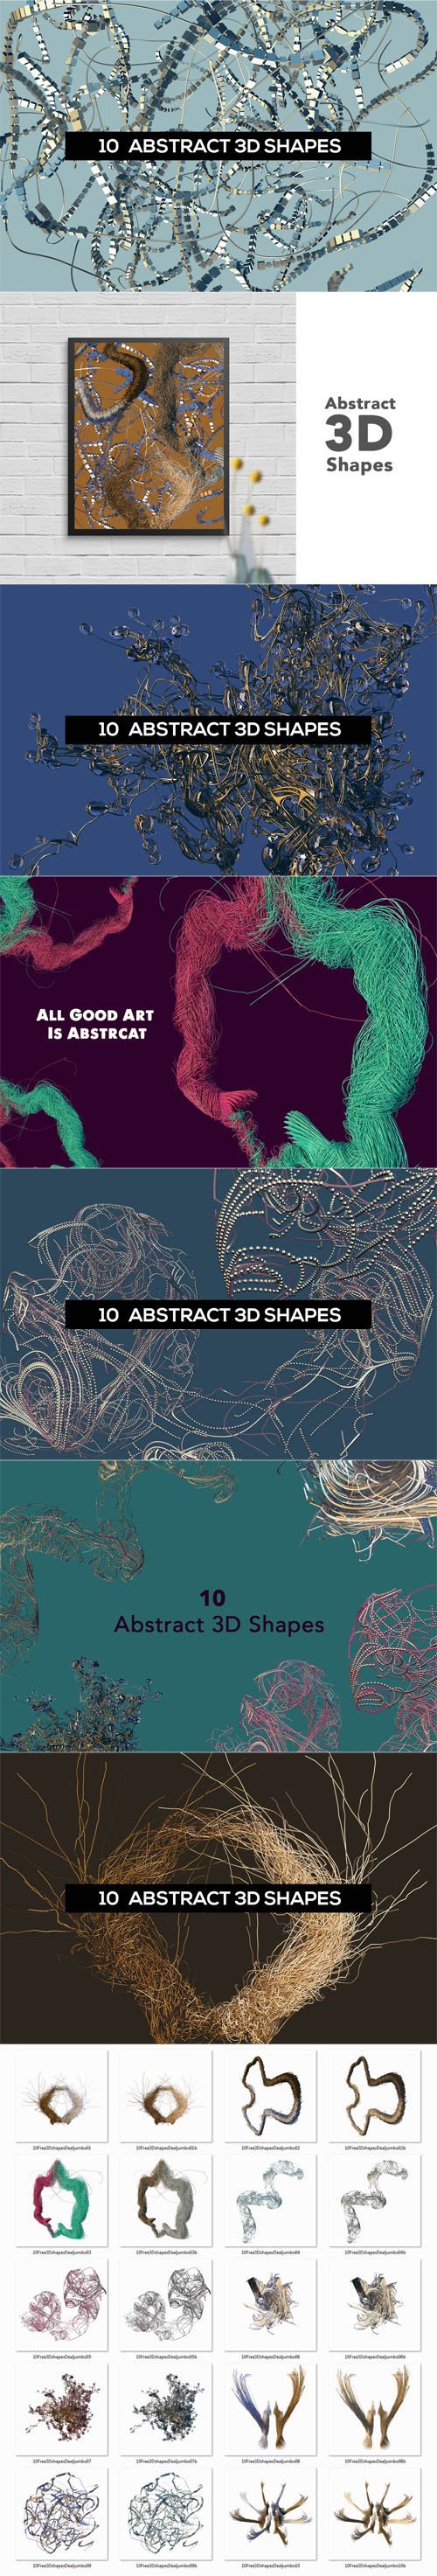 10 Abstract Futuristic 3D Shapes